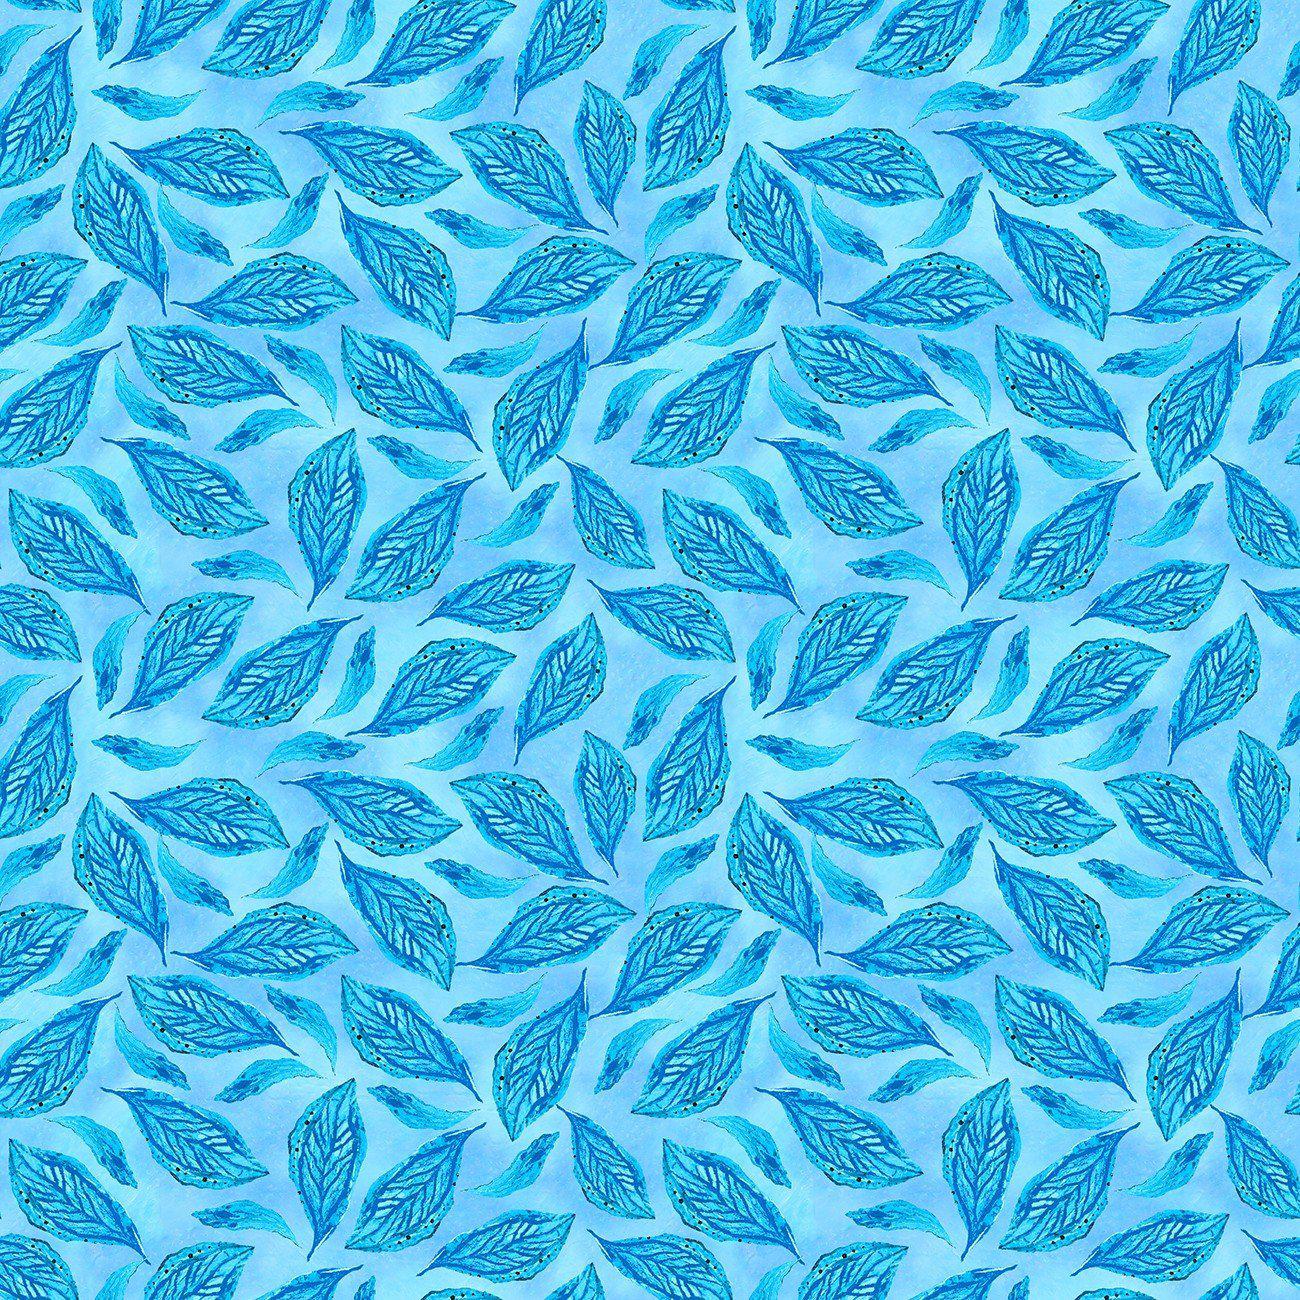 Painted Peacock Sky Tossed Small Leaves Digital Fabric